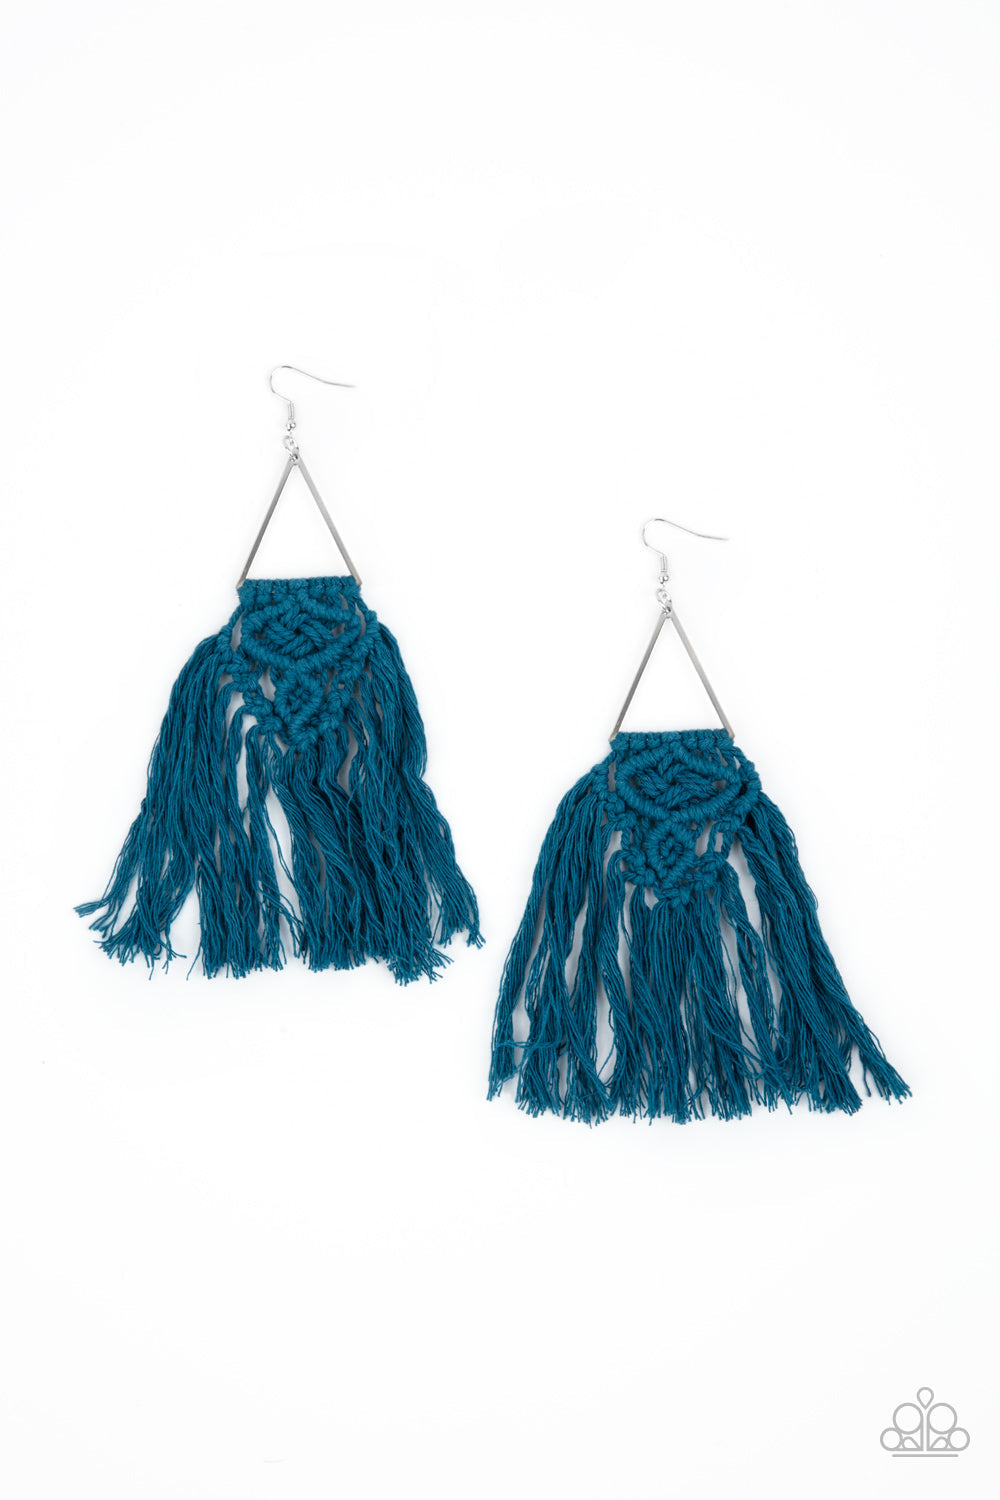 Modern Day Macrame - Blue Macrame Earrings - Paparazzi Accessories - Blue threaded tassels ornately knot at the bottom of a shimmery silver triangular frame, creating a macramé inspired fringe. Earring attaches to a standard fishhook fitting. Sold as one pair of earrings.